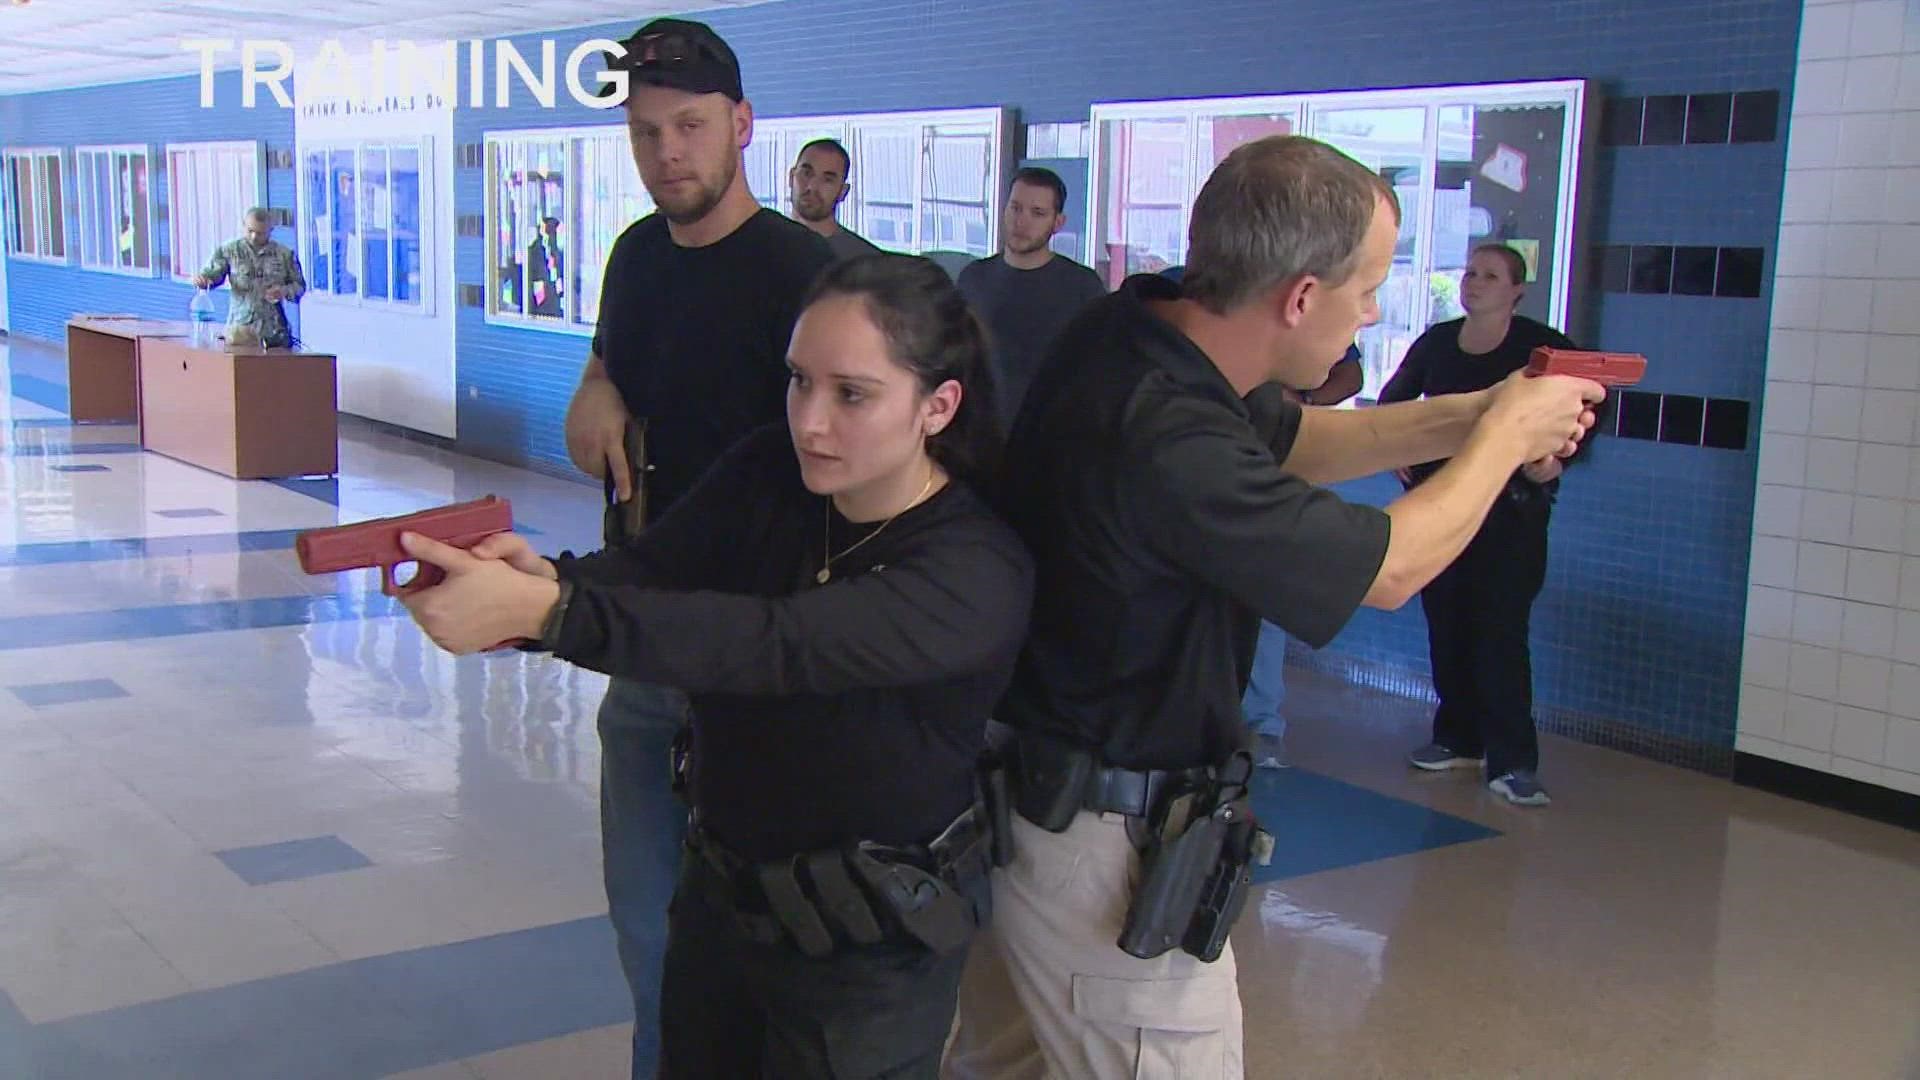 The training comes just before back-to-school time and after the  Uvalde school shooting -- where police have come under scrutiny for their delayed response.